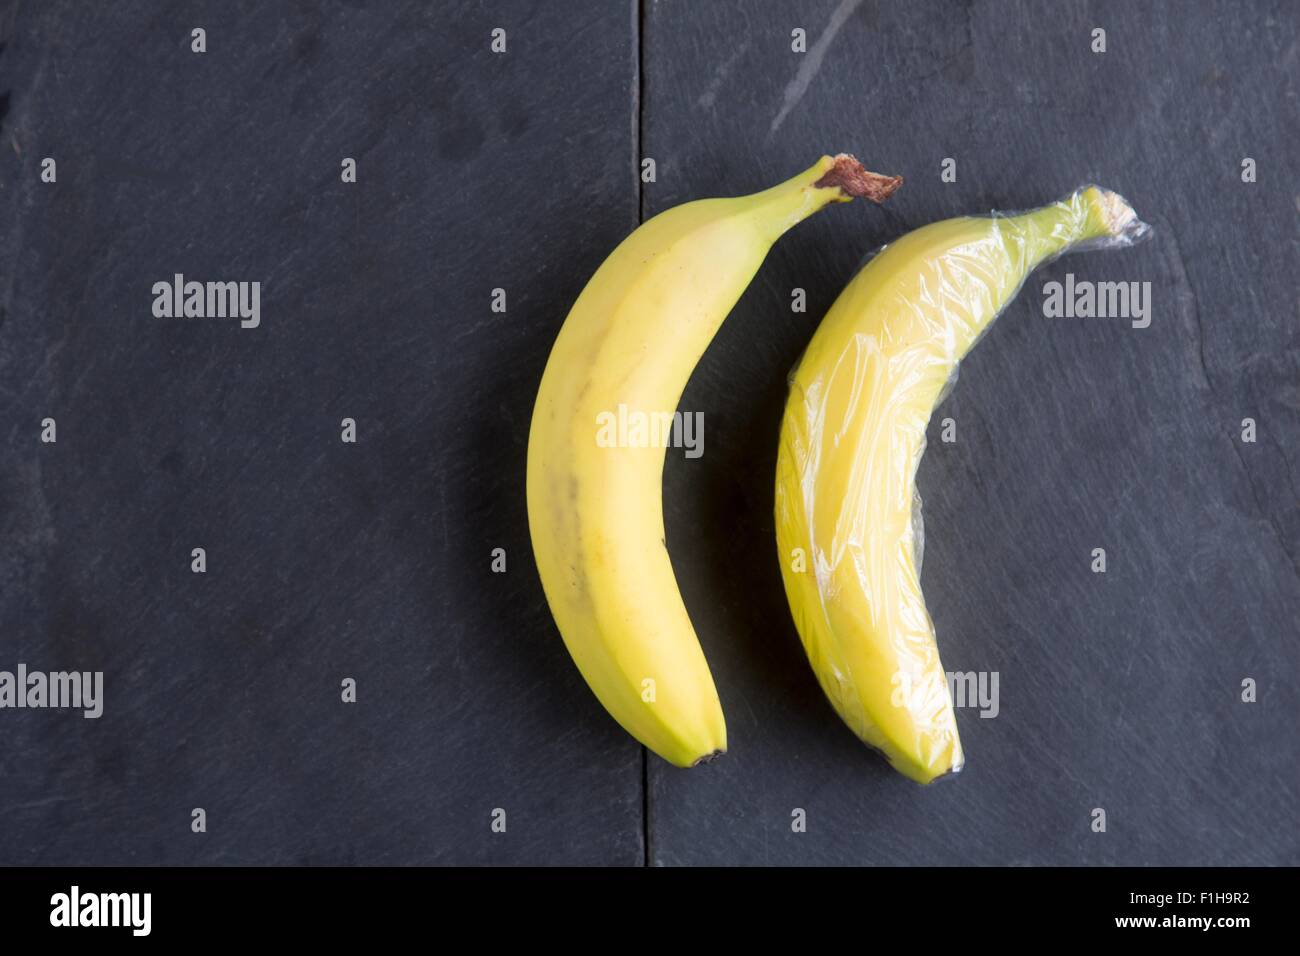 Still life of two bananas - one wrapped in plastic wrap Stock Photo